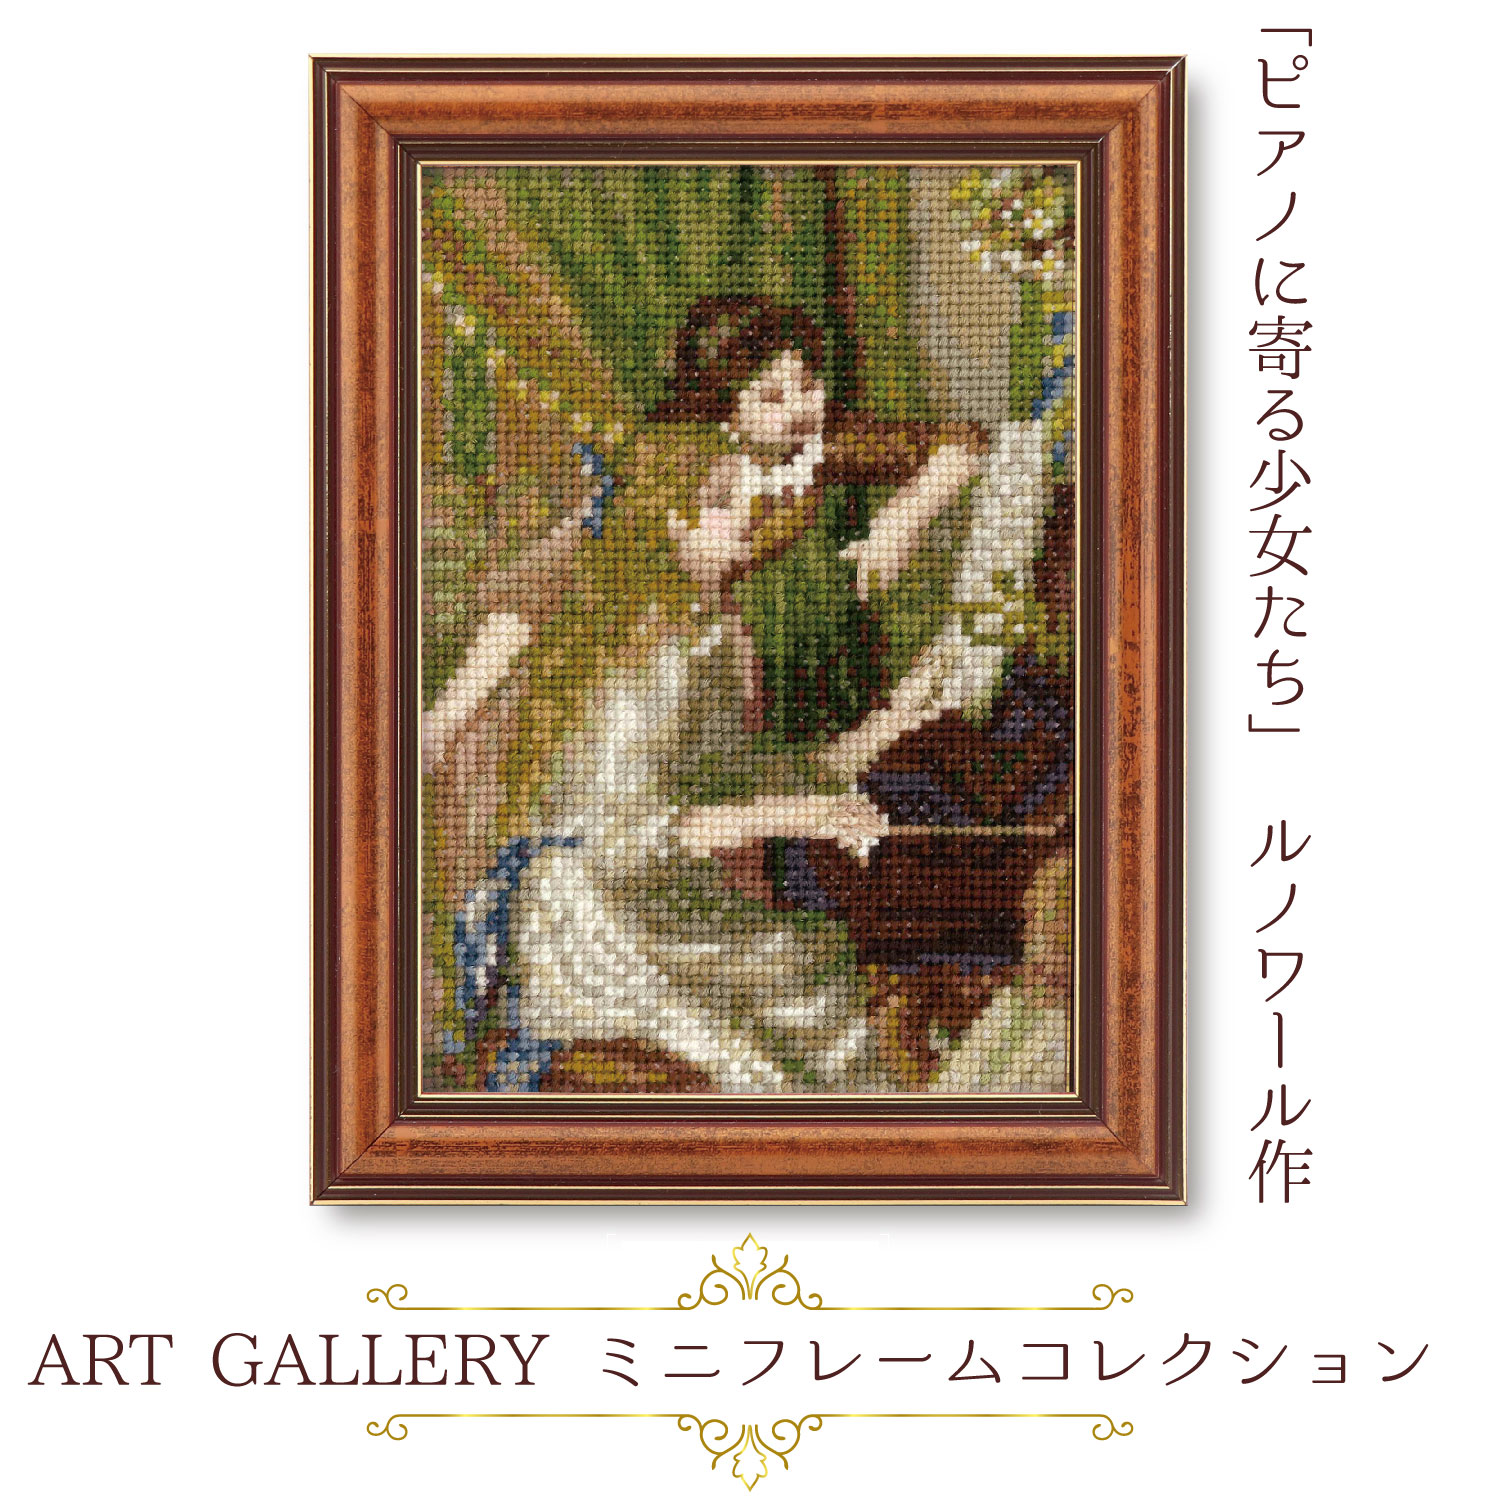 OLY-K7587 Olympus Embroidery Kit ART GALLERY Mini Frame Collection "Girls Near the Piano" by Renoir (pcs)